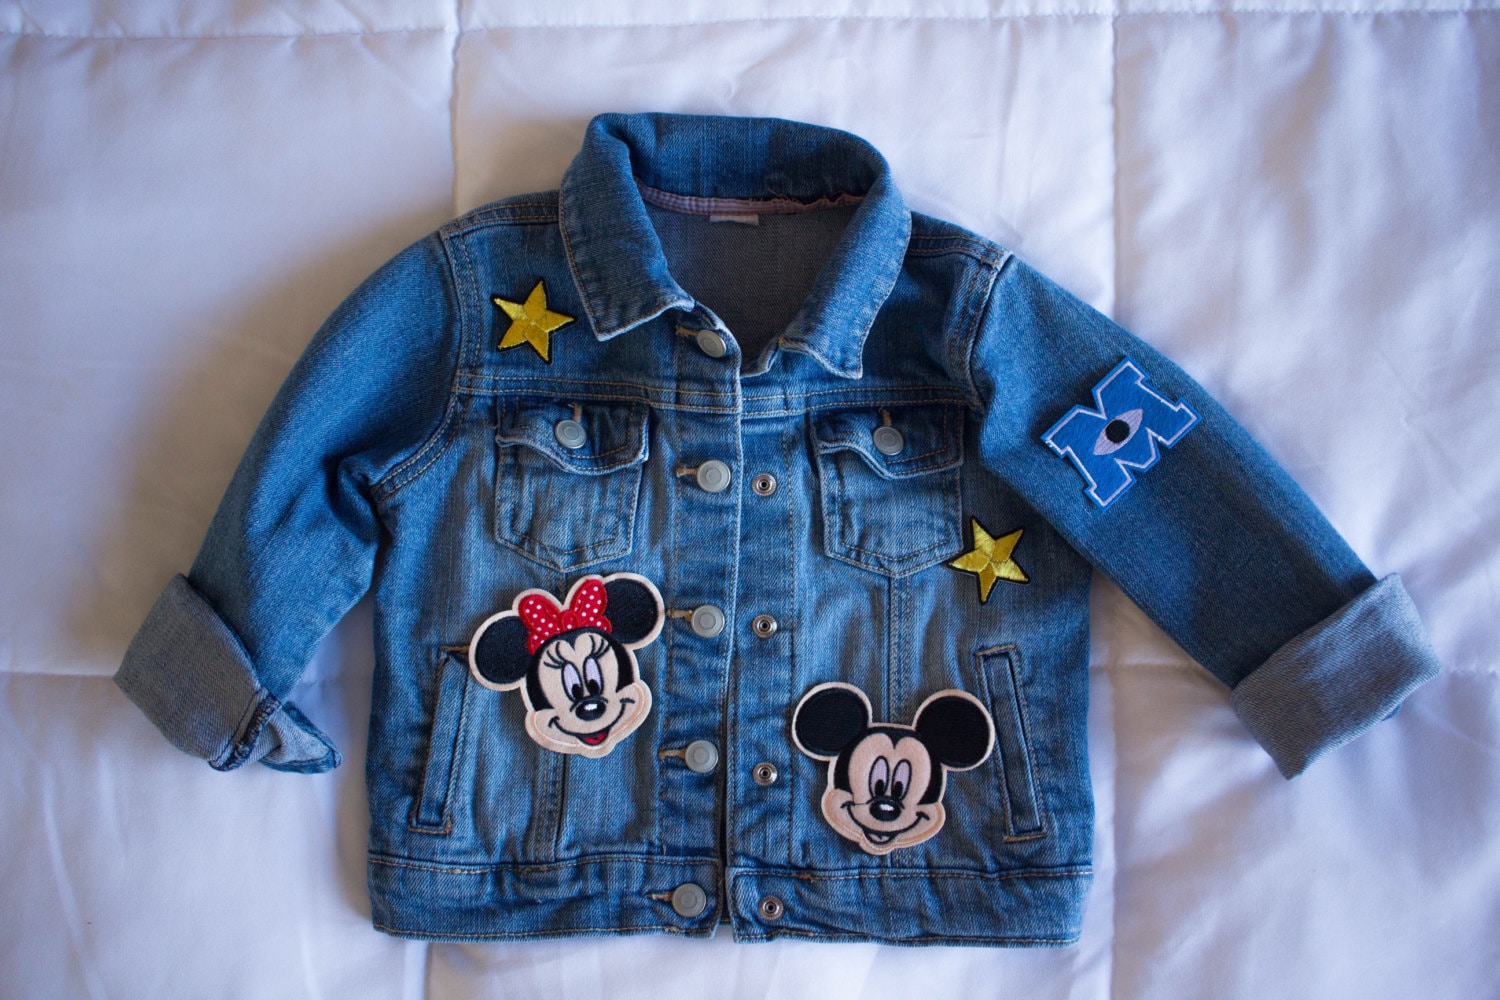 Girs Kids toddler 4t vintage Jean Jacket with Disney Patches